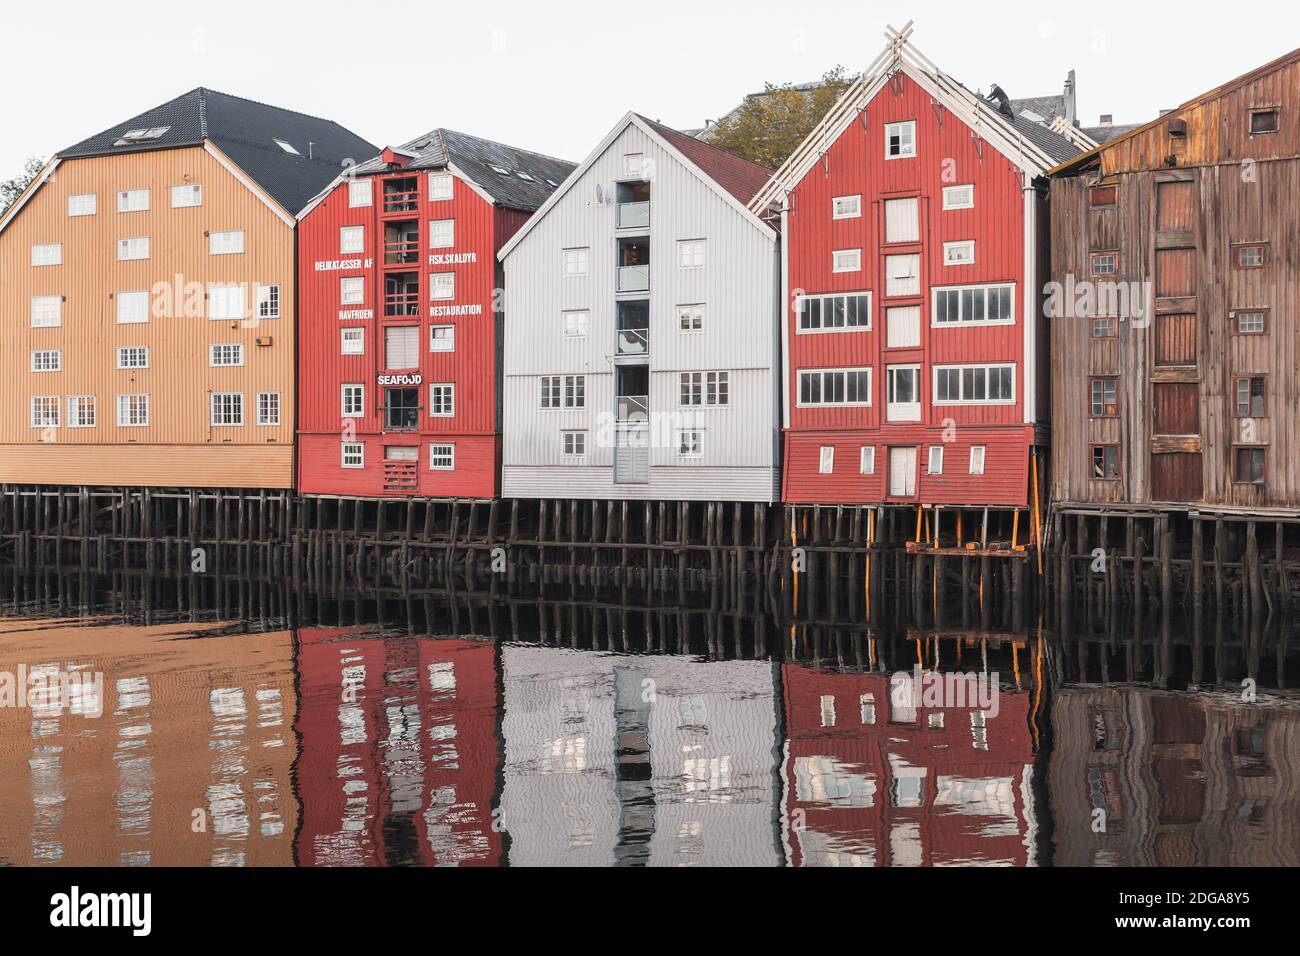 Trondheim, Norway - October 18, 2016: Colorful wooden houses in old town of Trondheim. Coast of Nidelva river Stock Photo